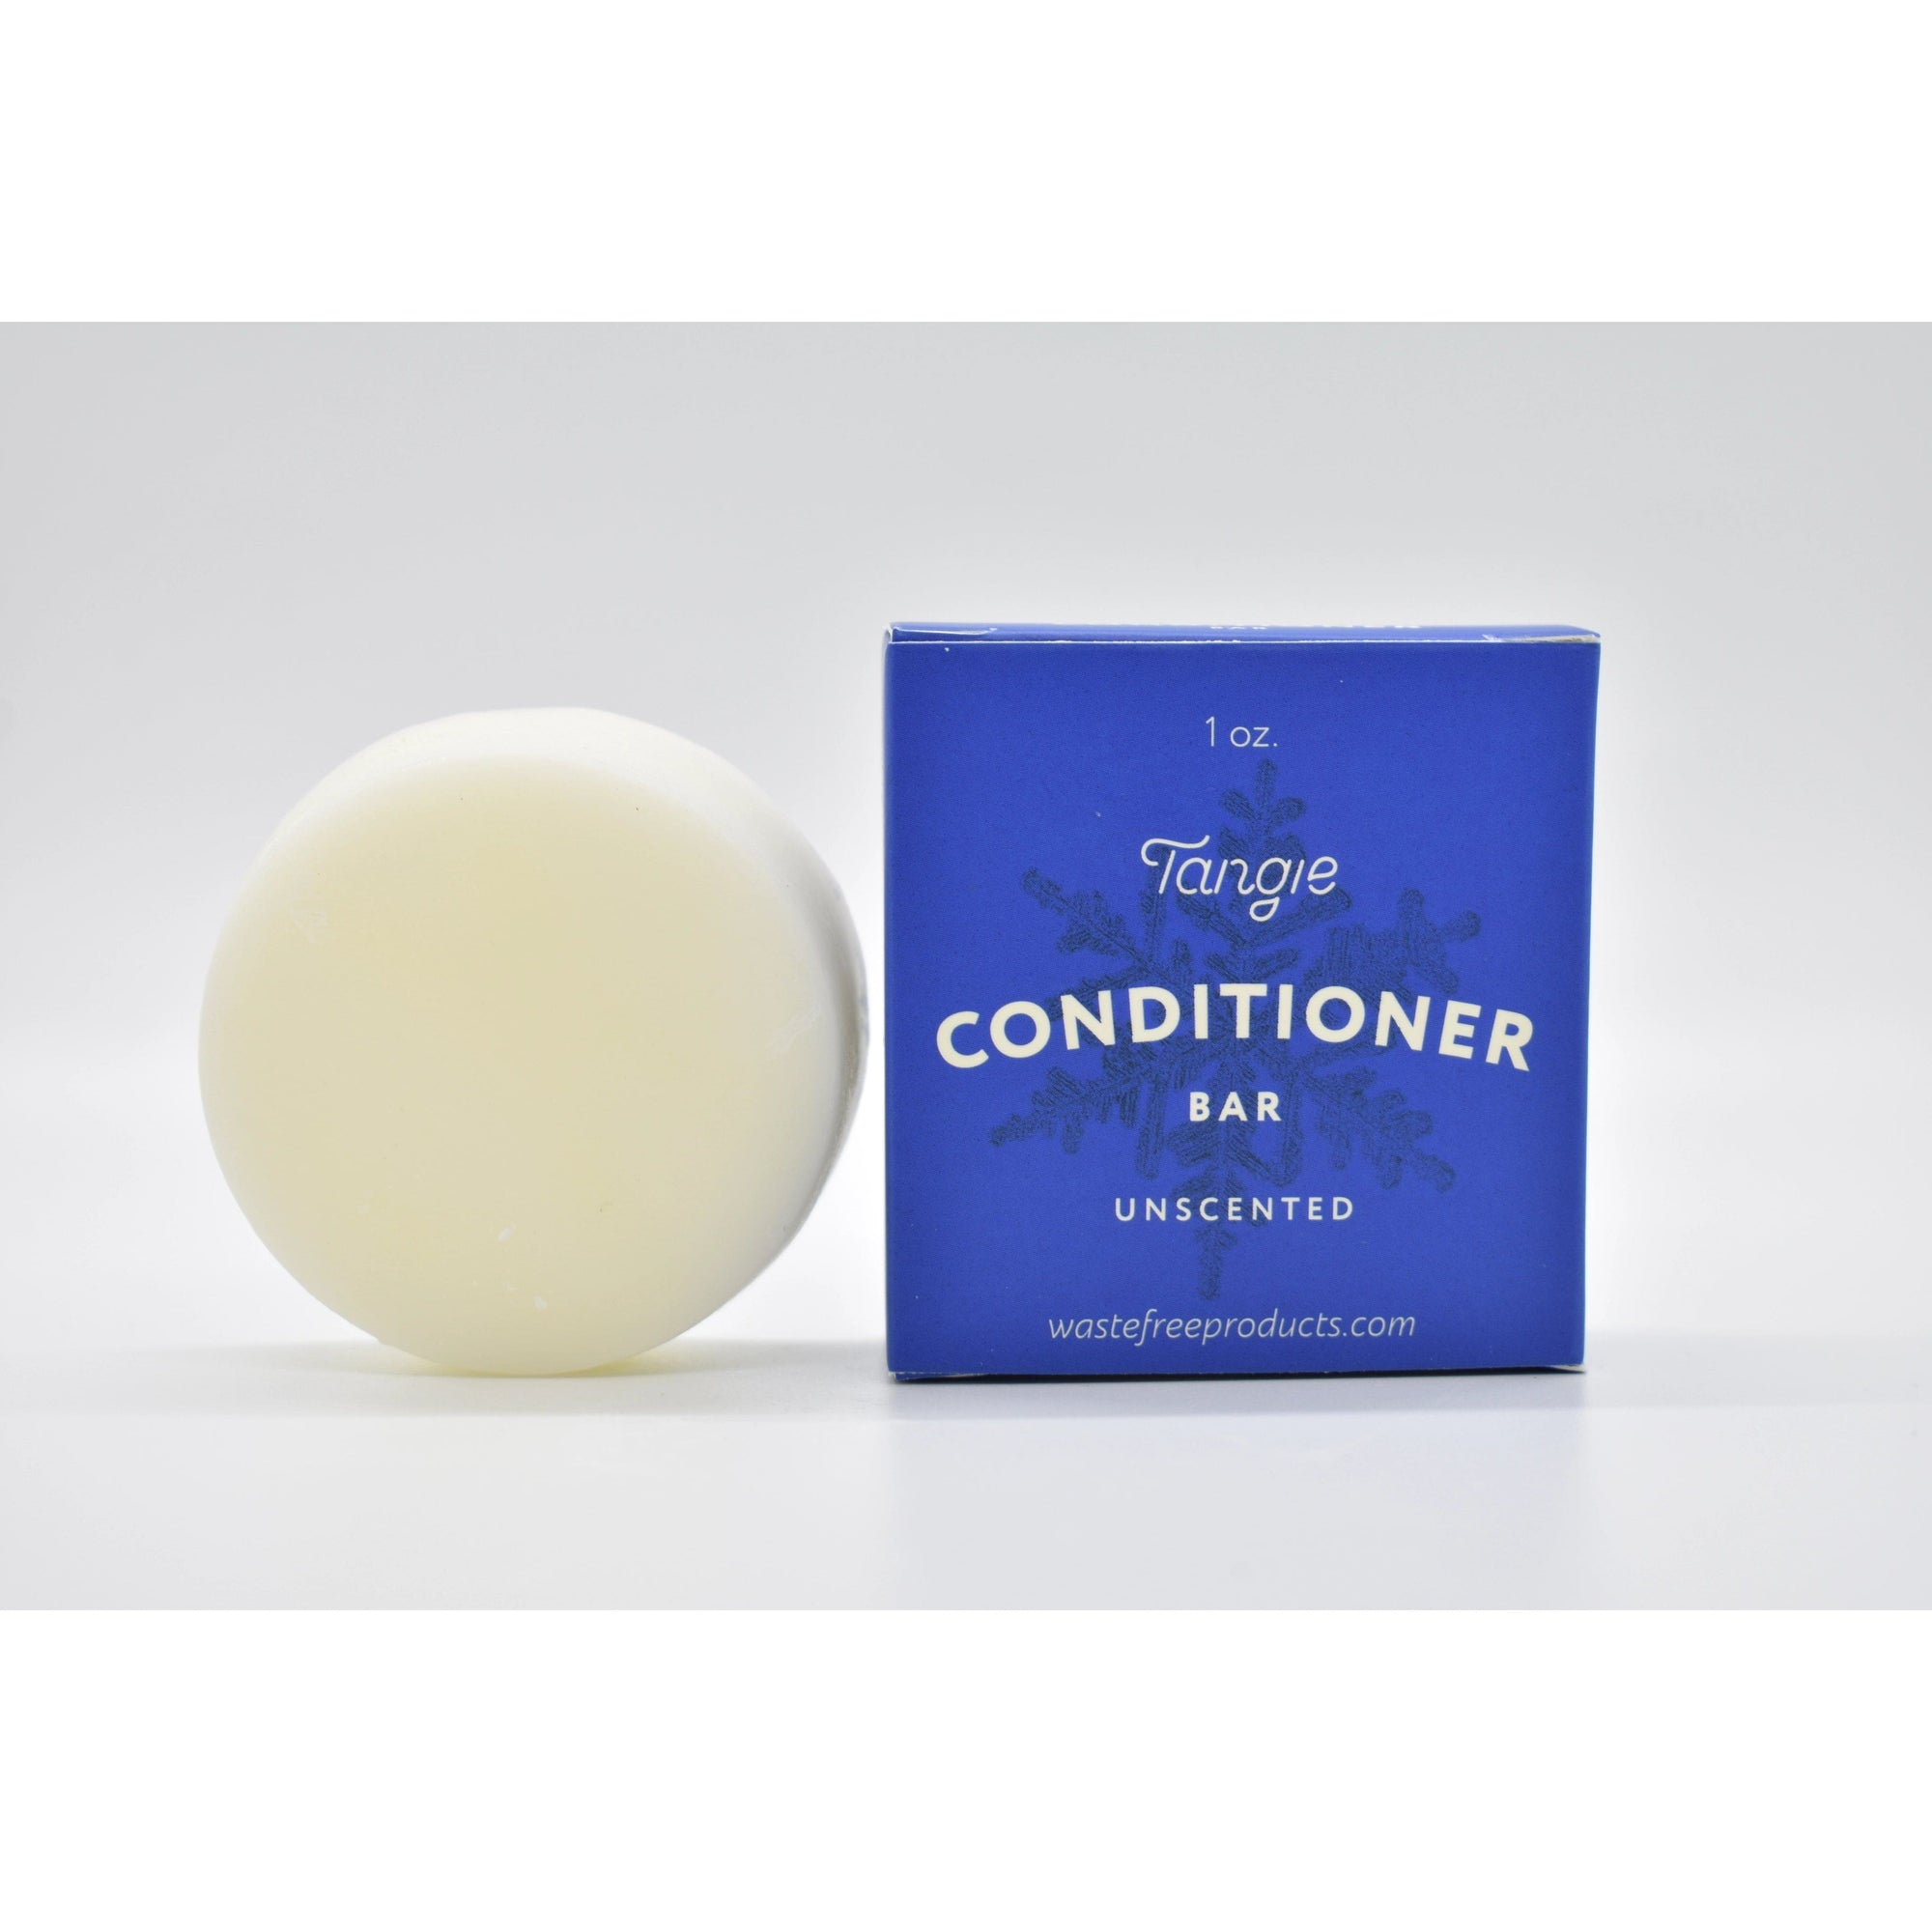 Bar Conditioner - Unscented